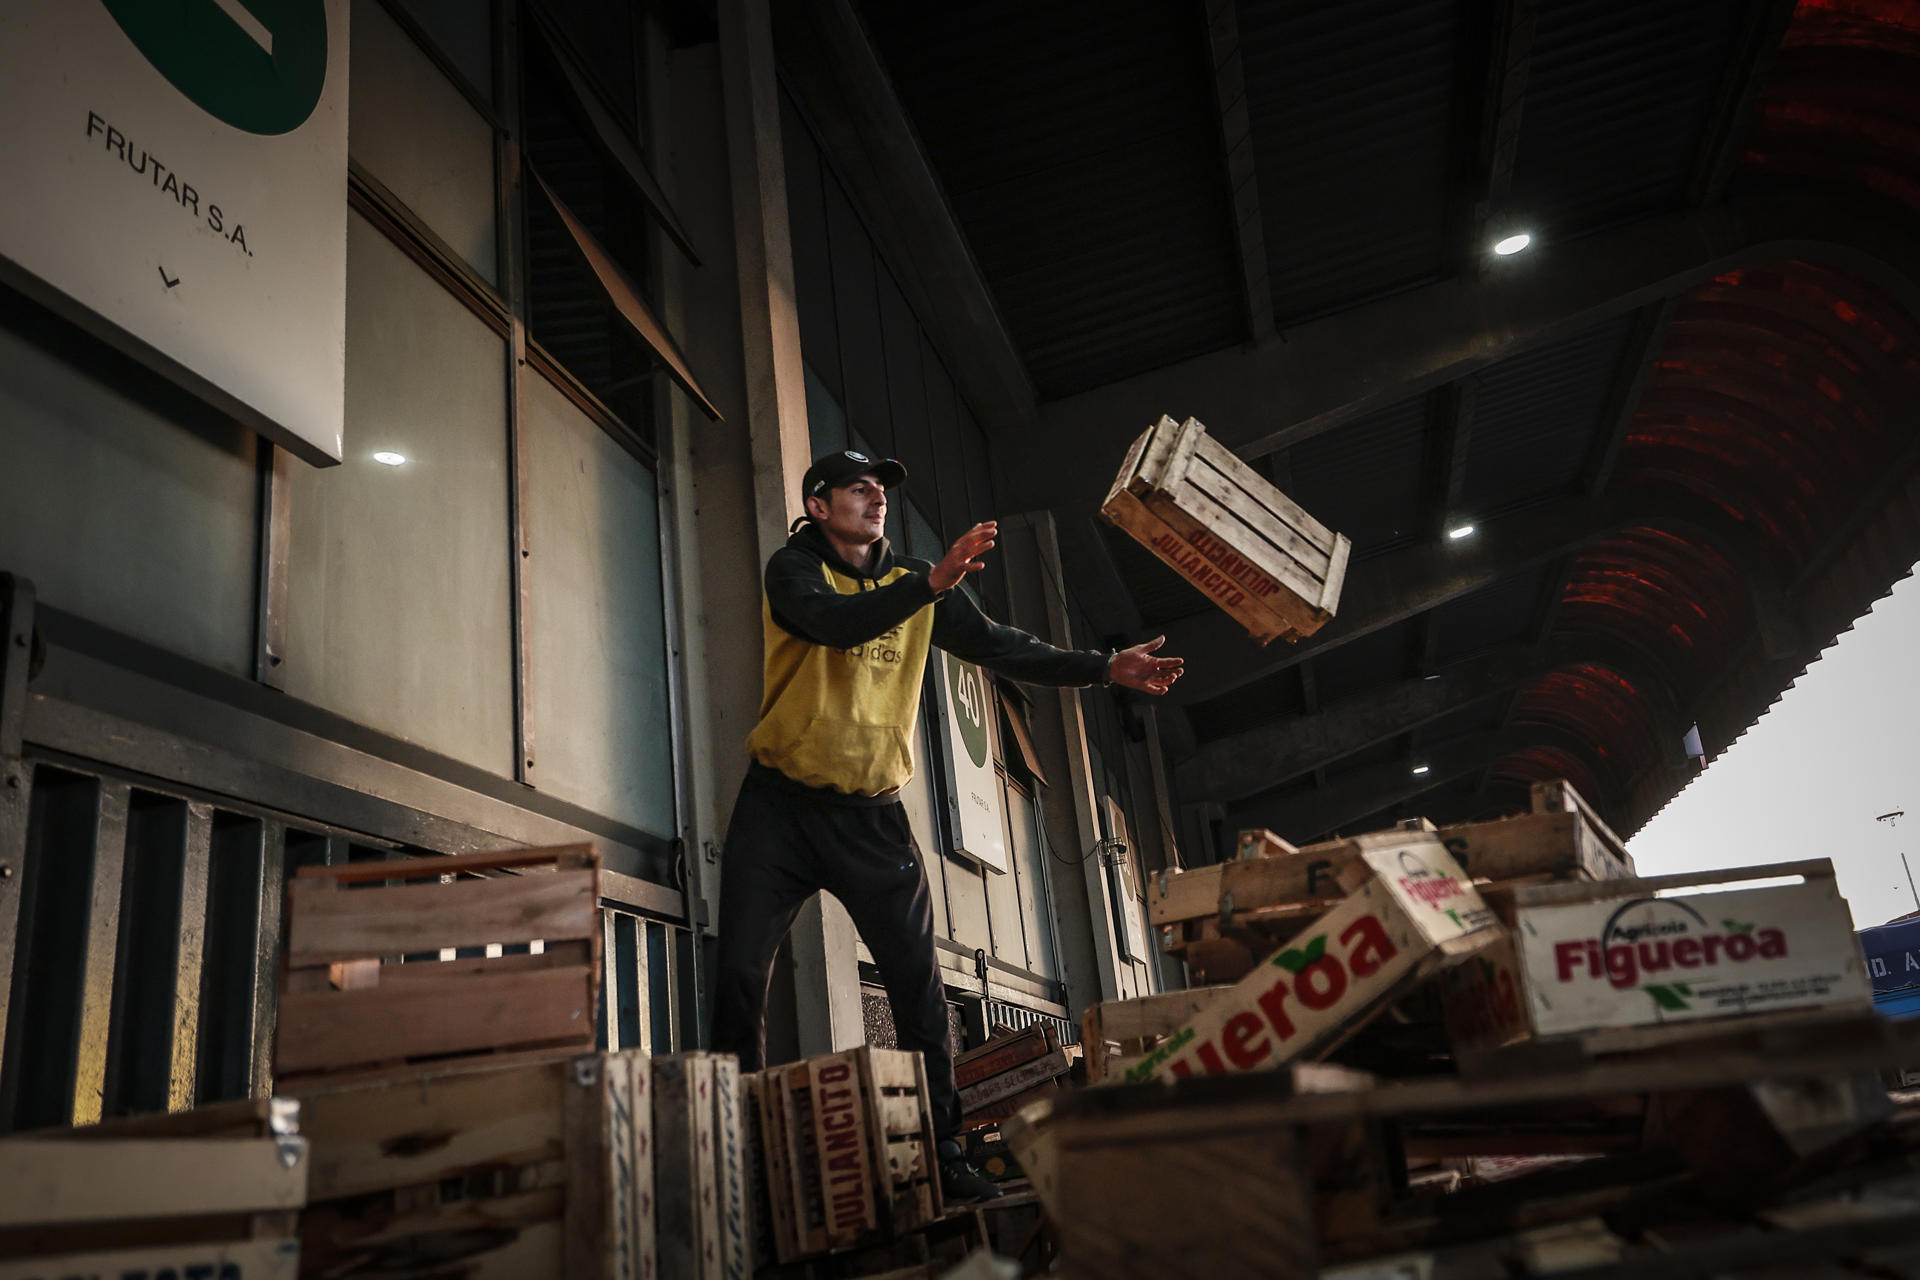 A man throws a box at the Central Fruit and Vegetable market in Buenos Aires, Argentina, 13 April 2023. EFE/Juan Ignacio Roncoroni